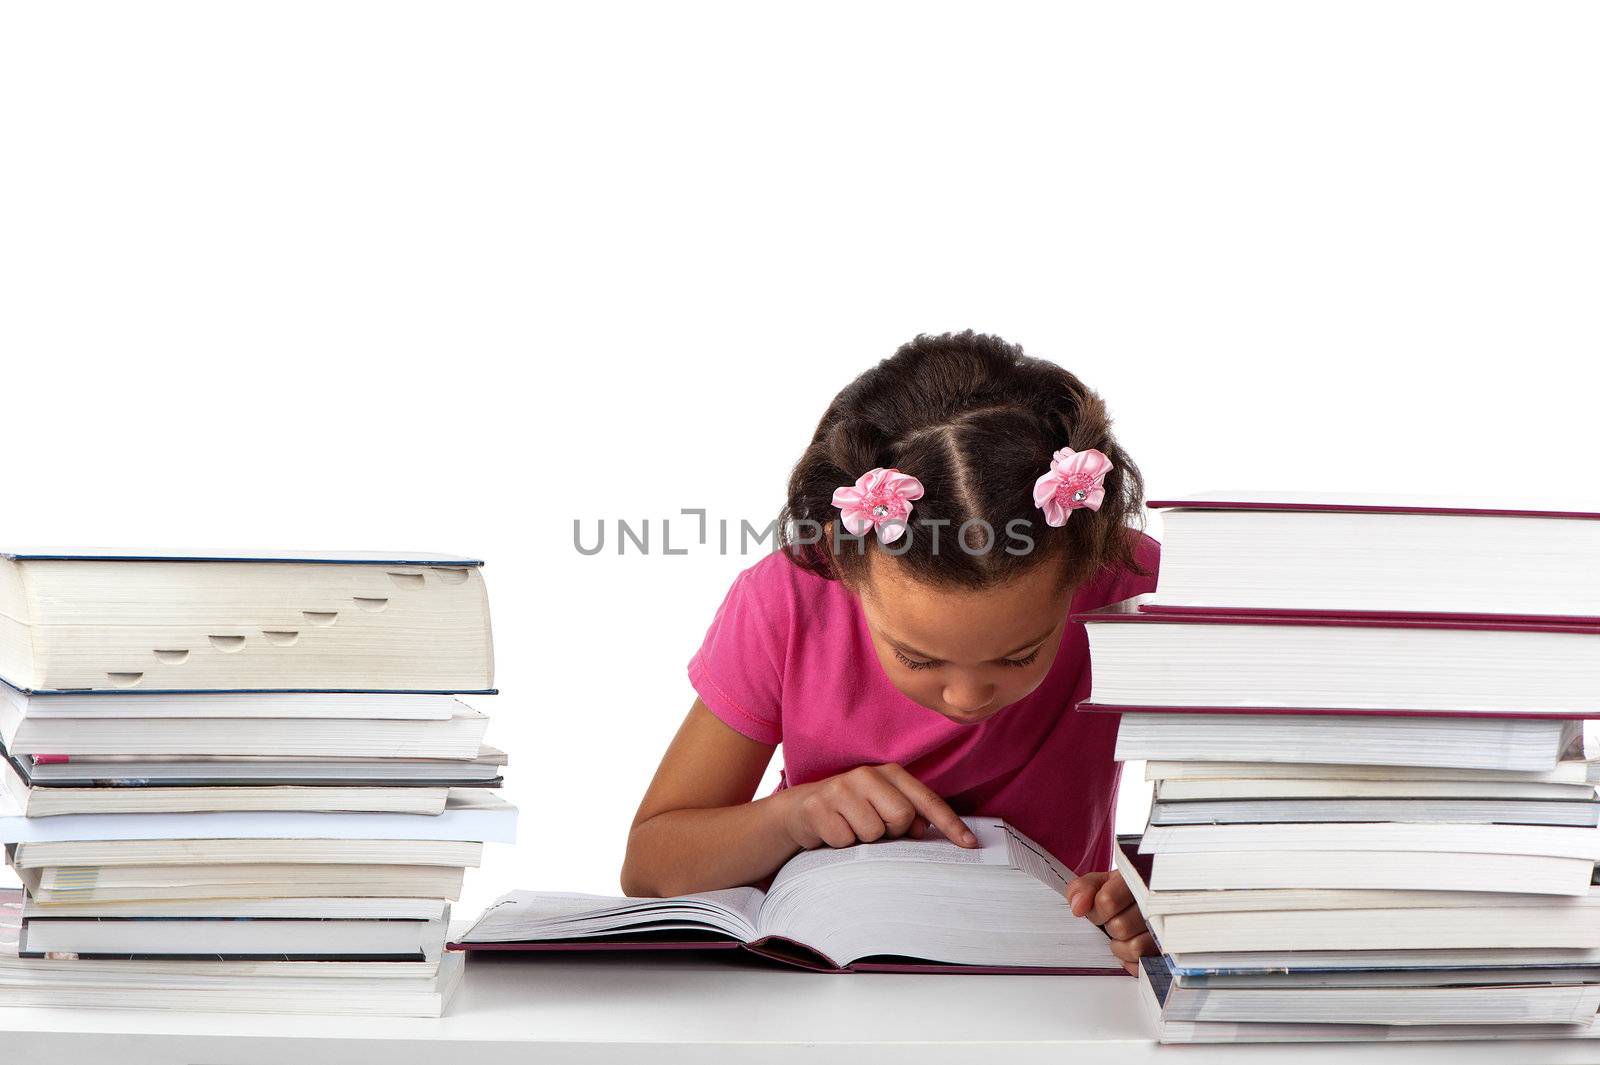 A young girl stays focused whilst reading a huge book in the midst of other reading material.